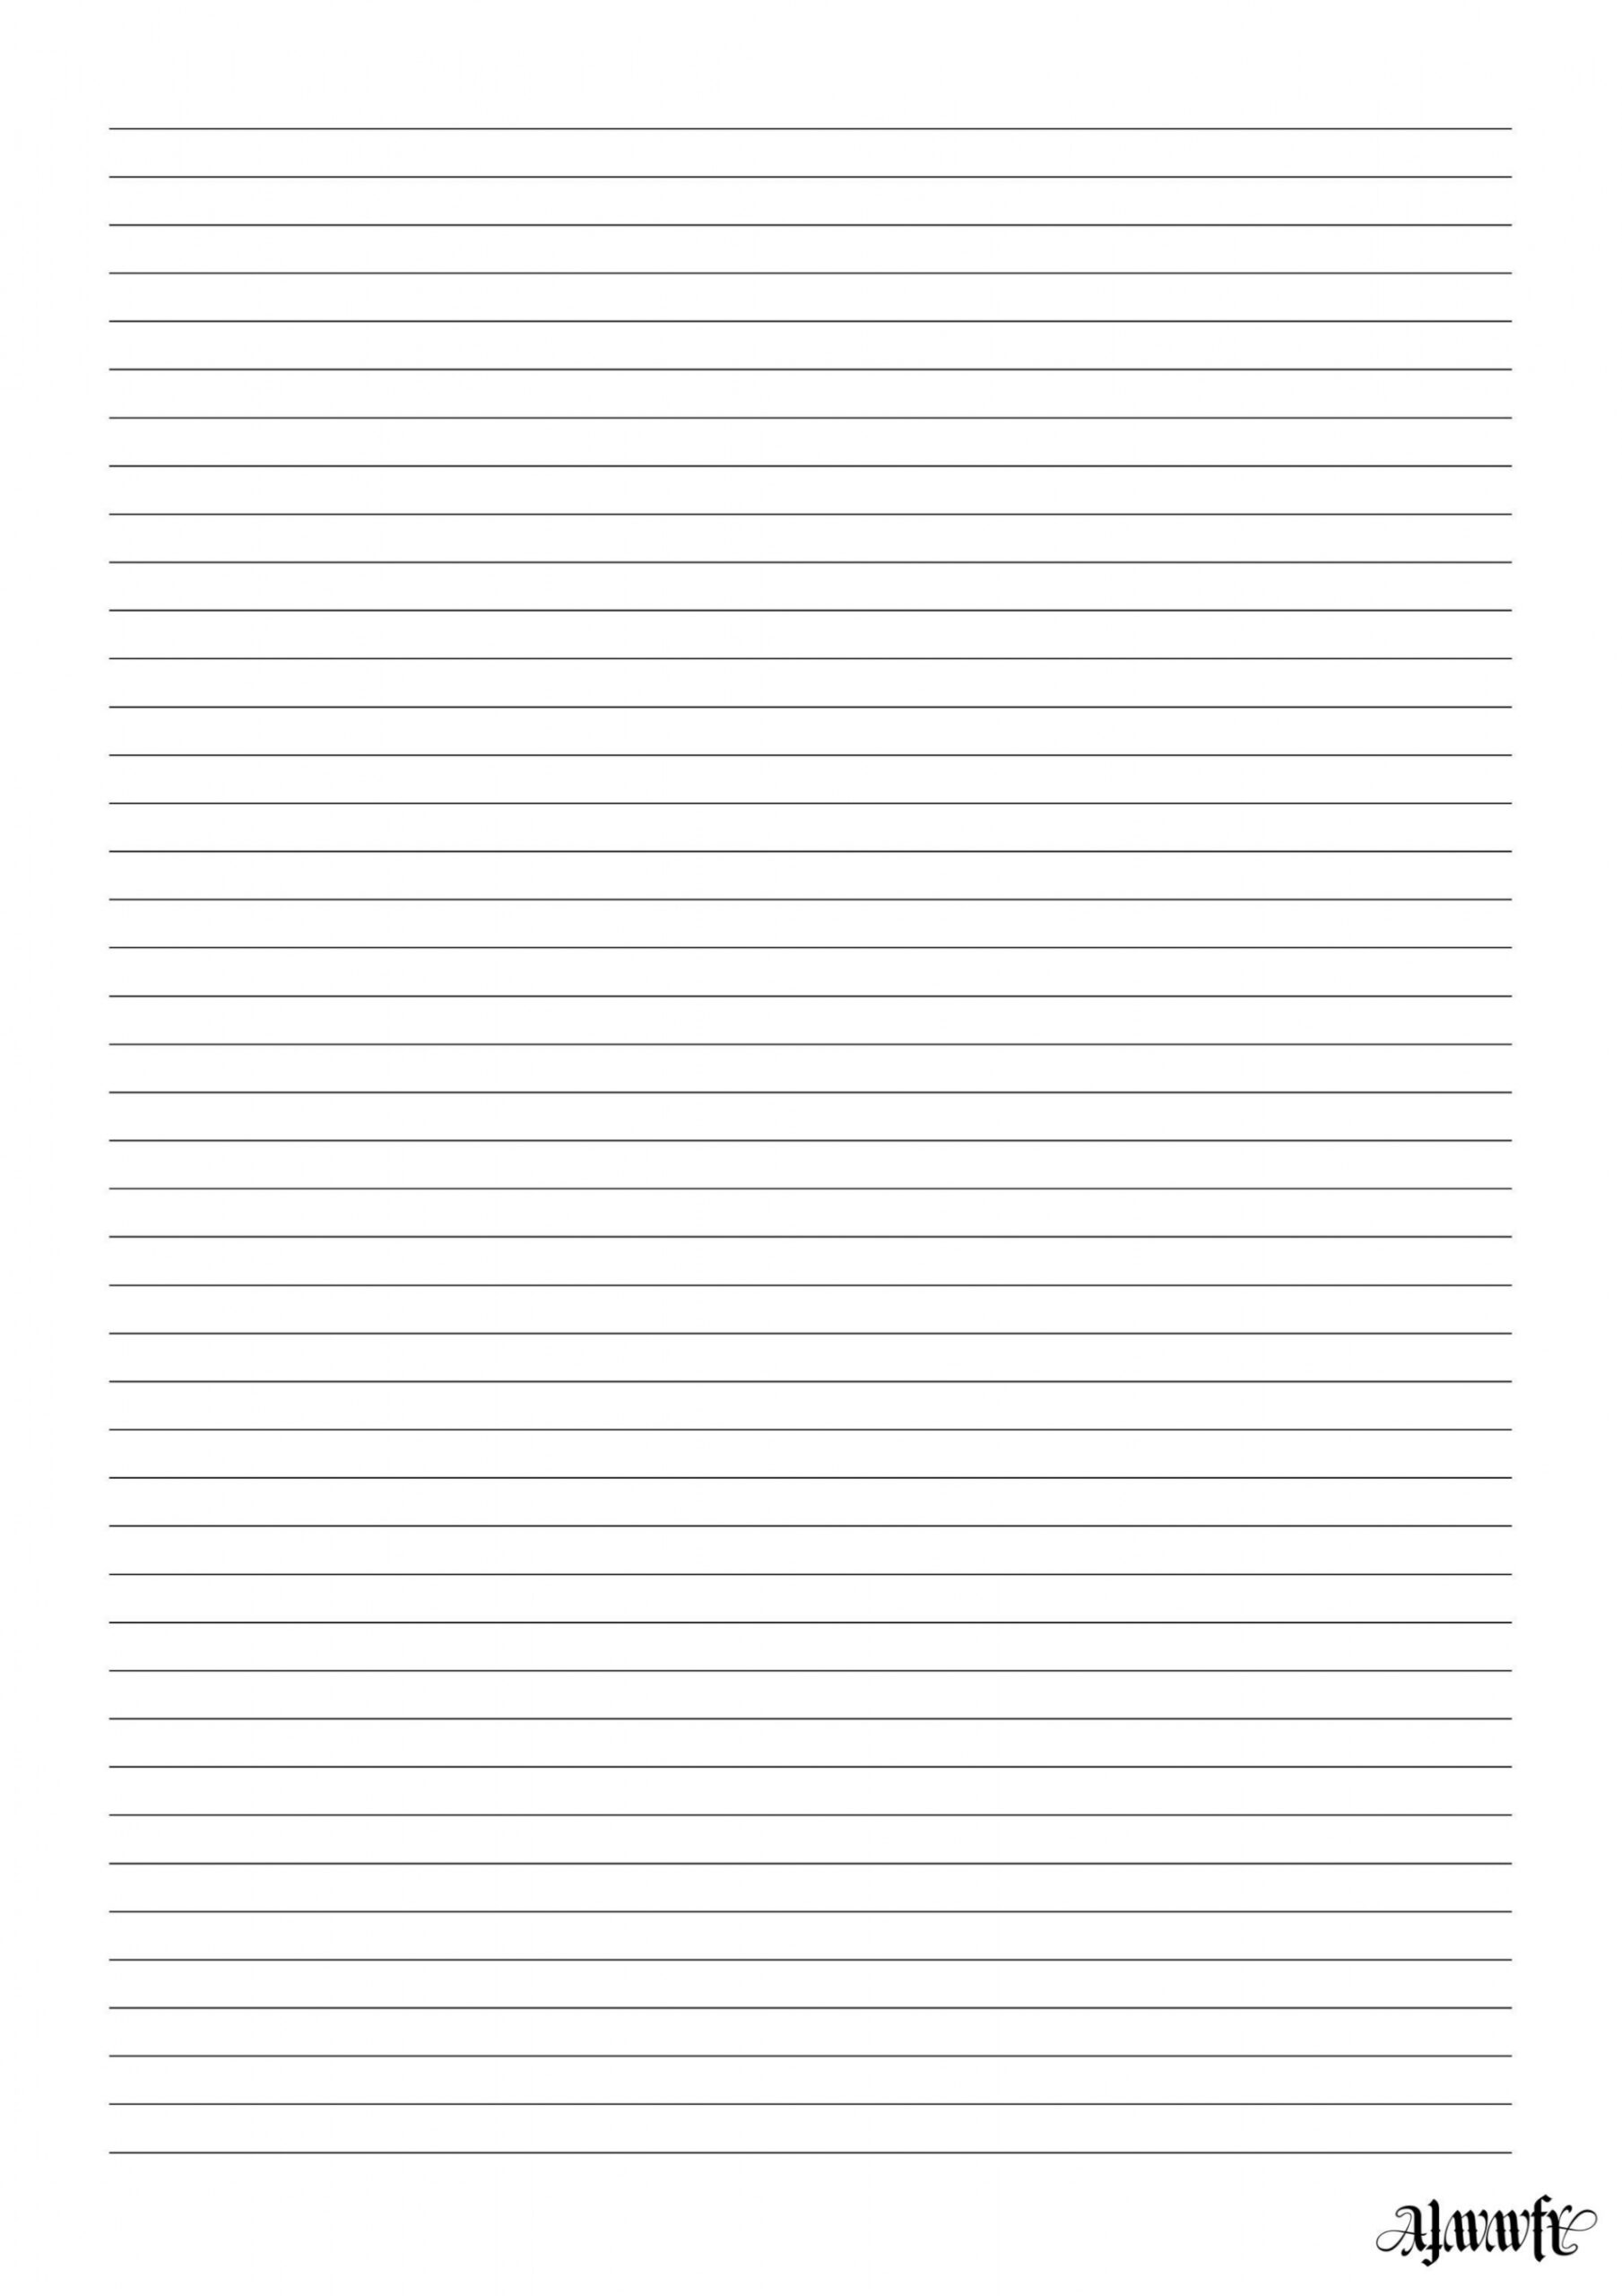 Lined Printable A paper, letter writing, personal use only - Printable Writing Paper